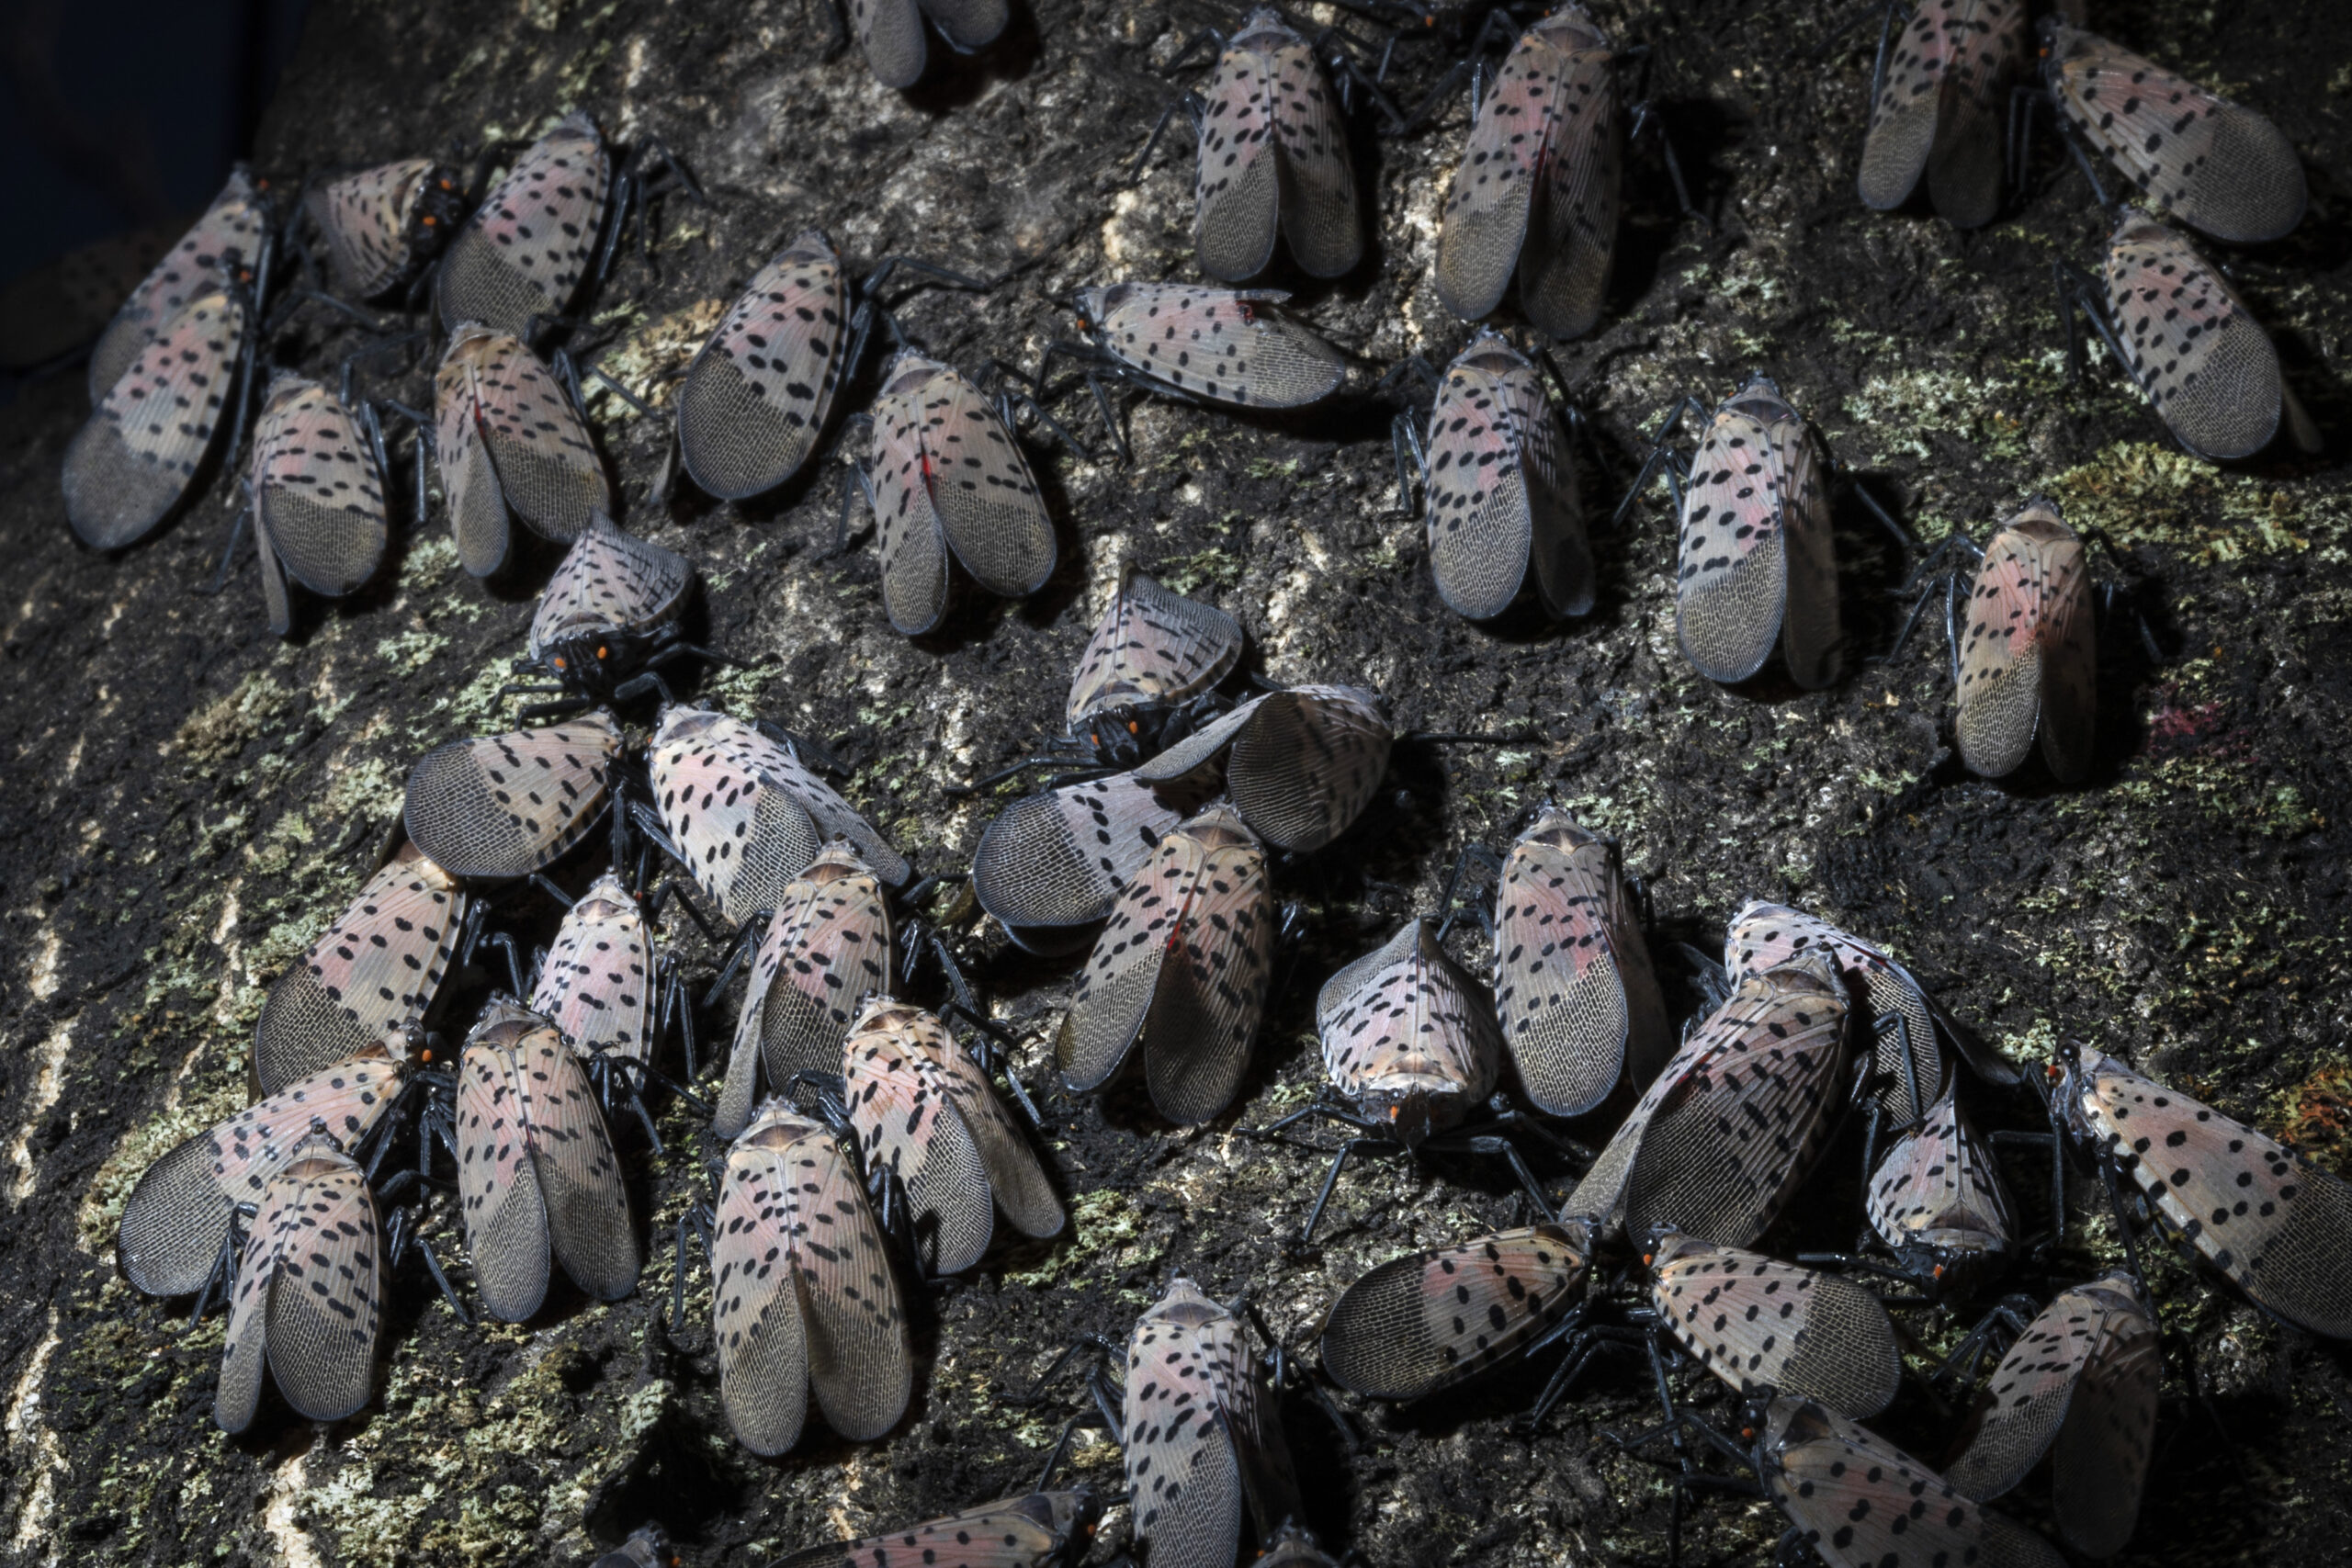 Spotted lanternflies detected in 2 of Wisconsin’s neighboring states